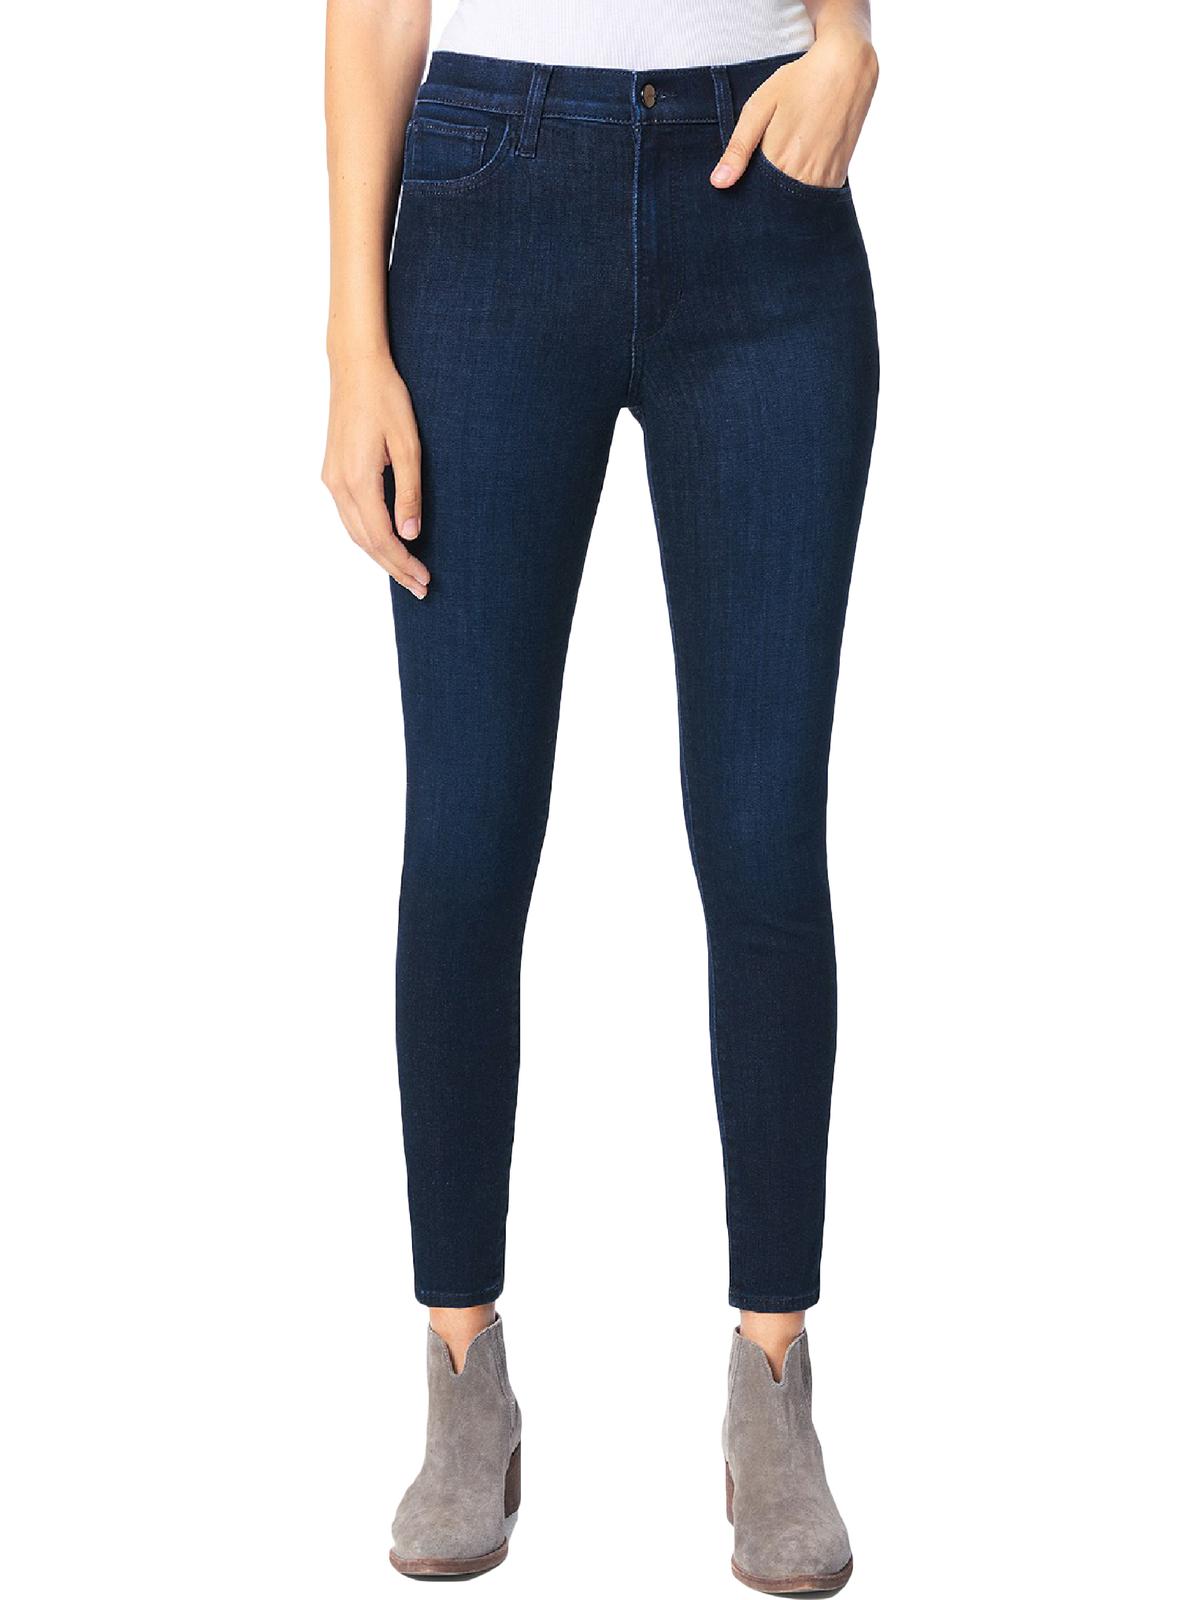 JOE'S The Charlie Womens High Rise Ankle Skinny Jeans